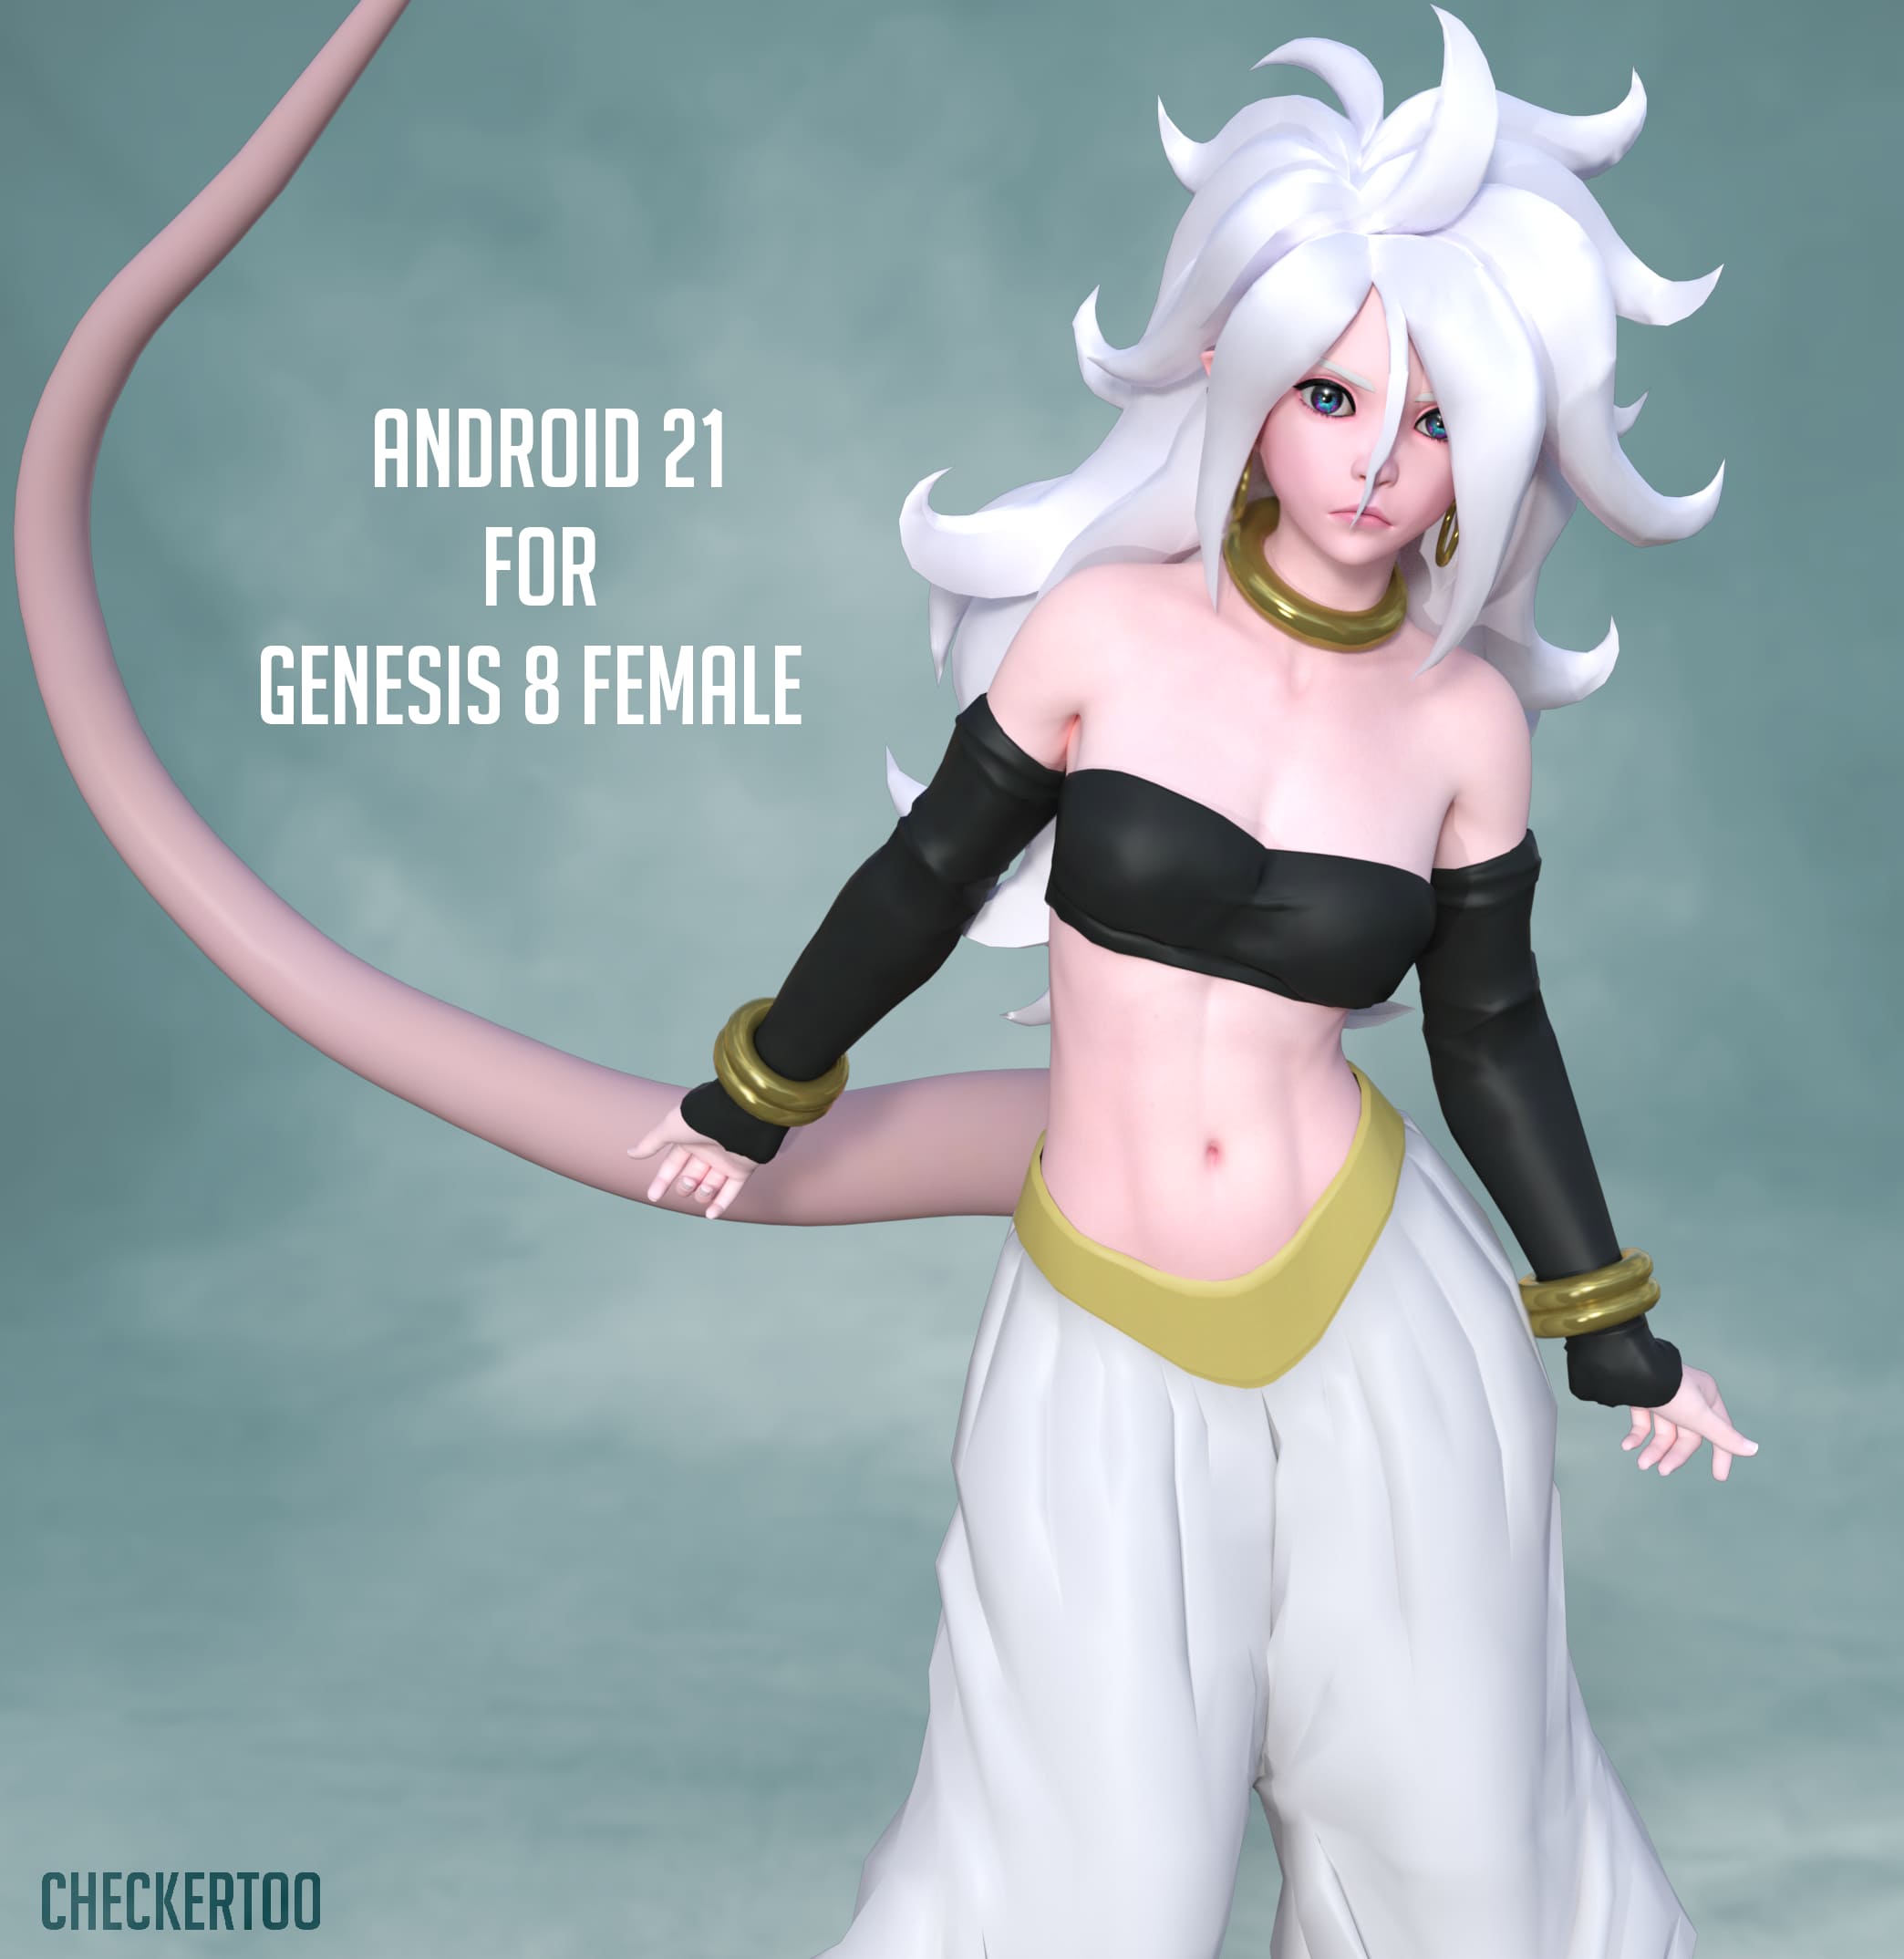 Android 21 For G8F_DAZ3D下载站